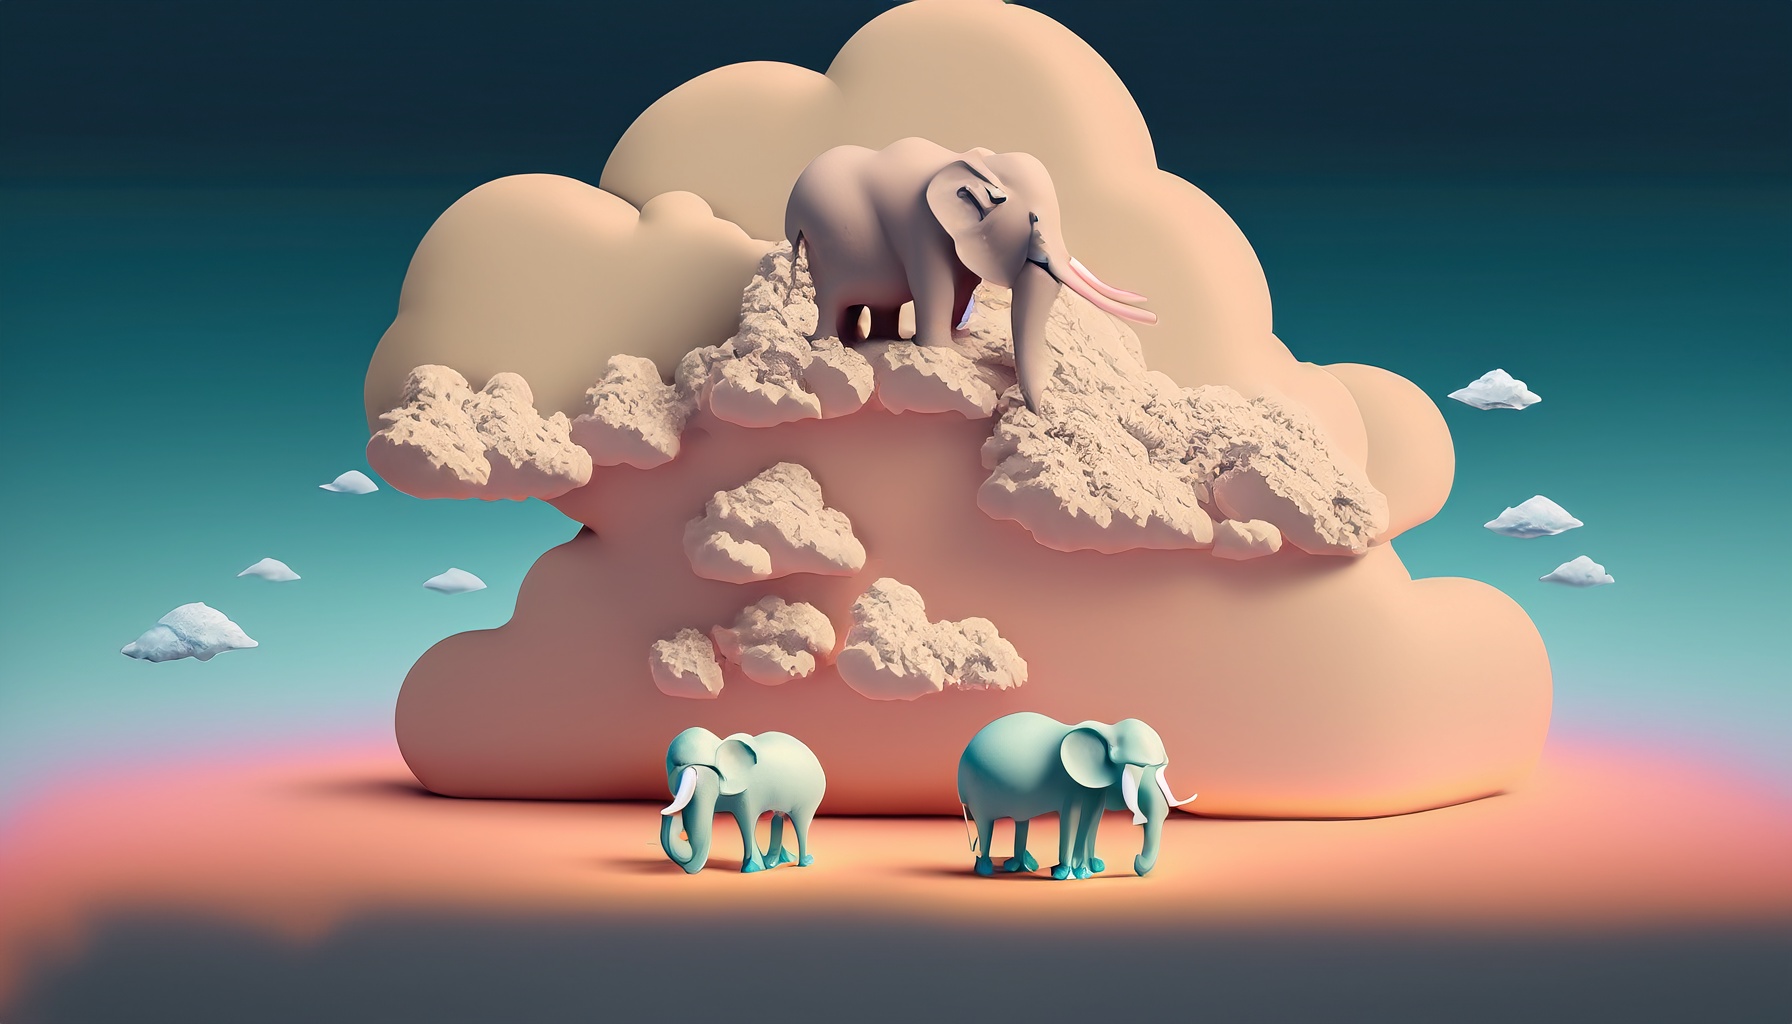 The average cloud weighs as much as 100 elephants